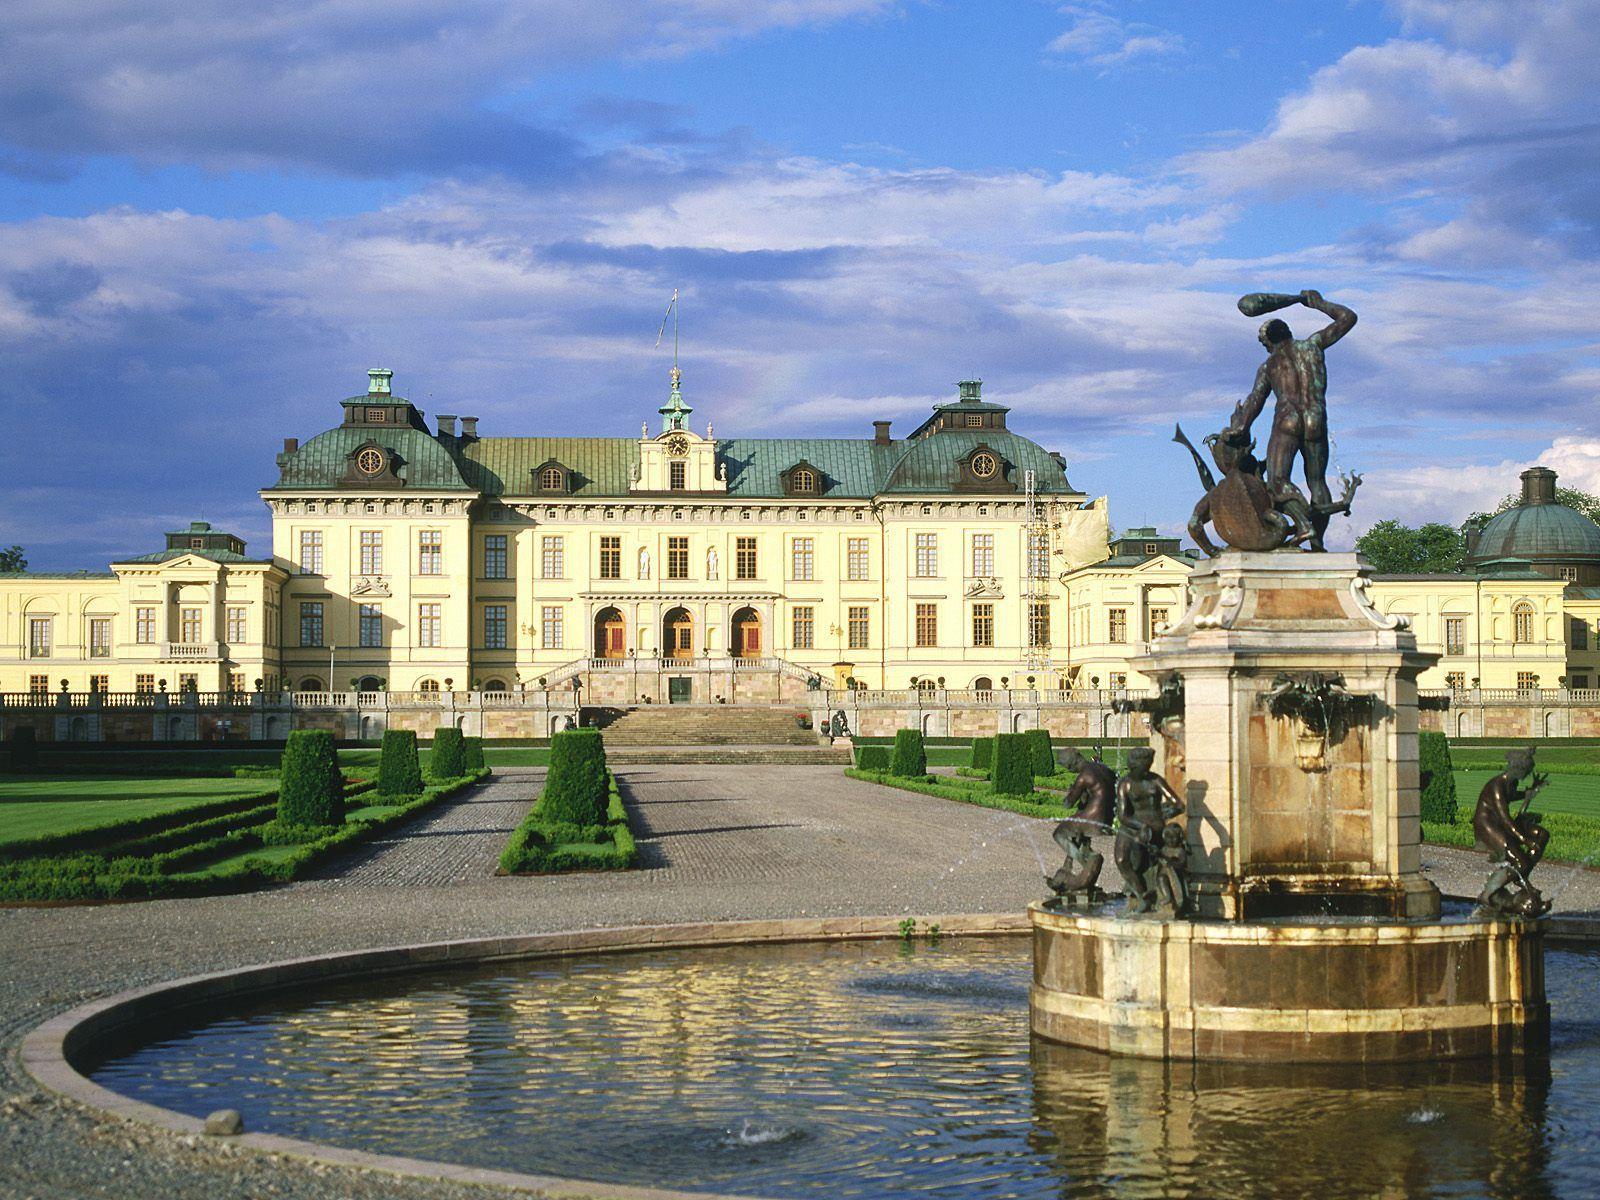 Drottningholm Palace: A Main Attraction of Swedish Beauty